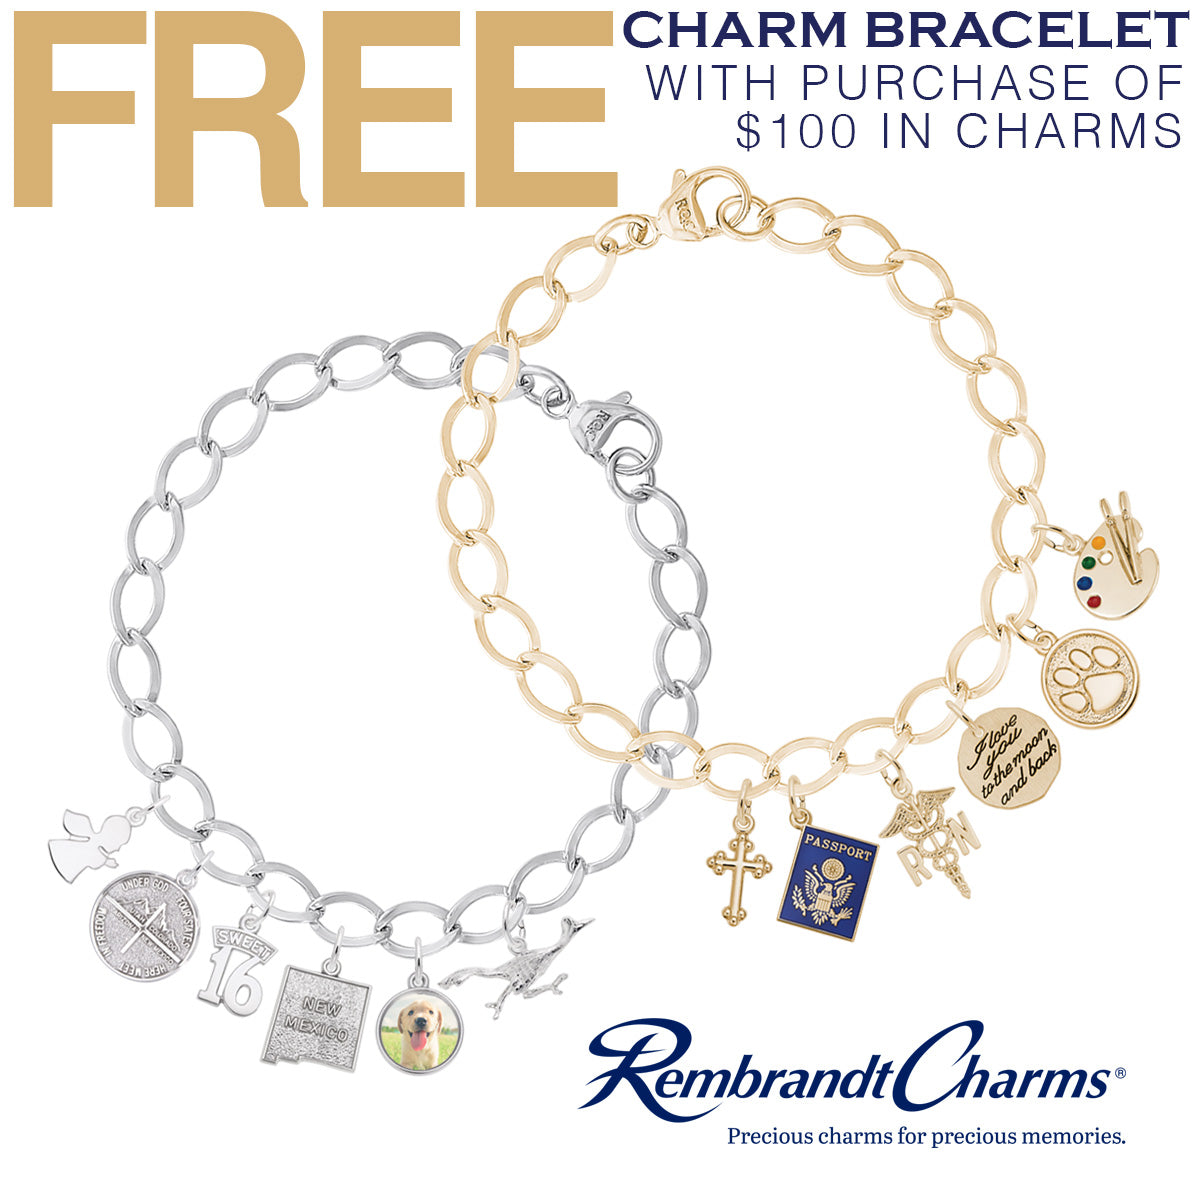 Free Charm Bracelet Event, Coming Soon!